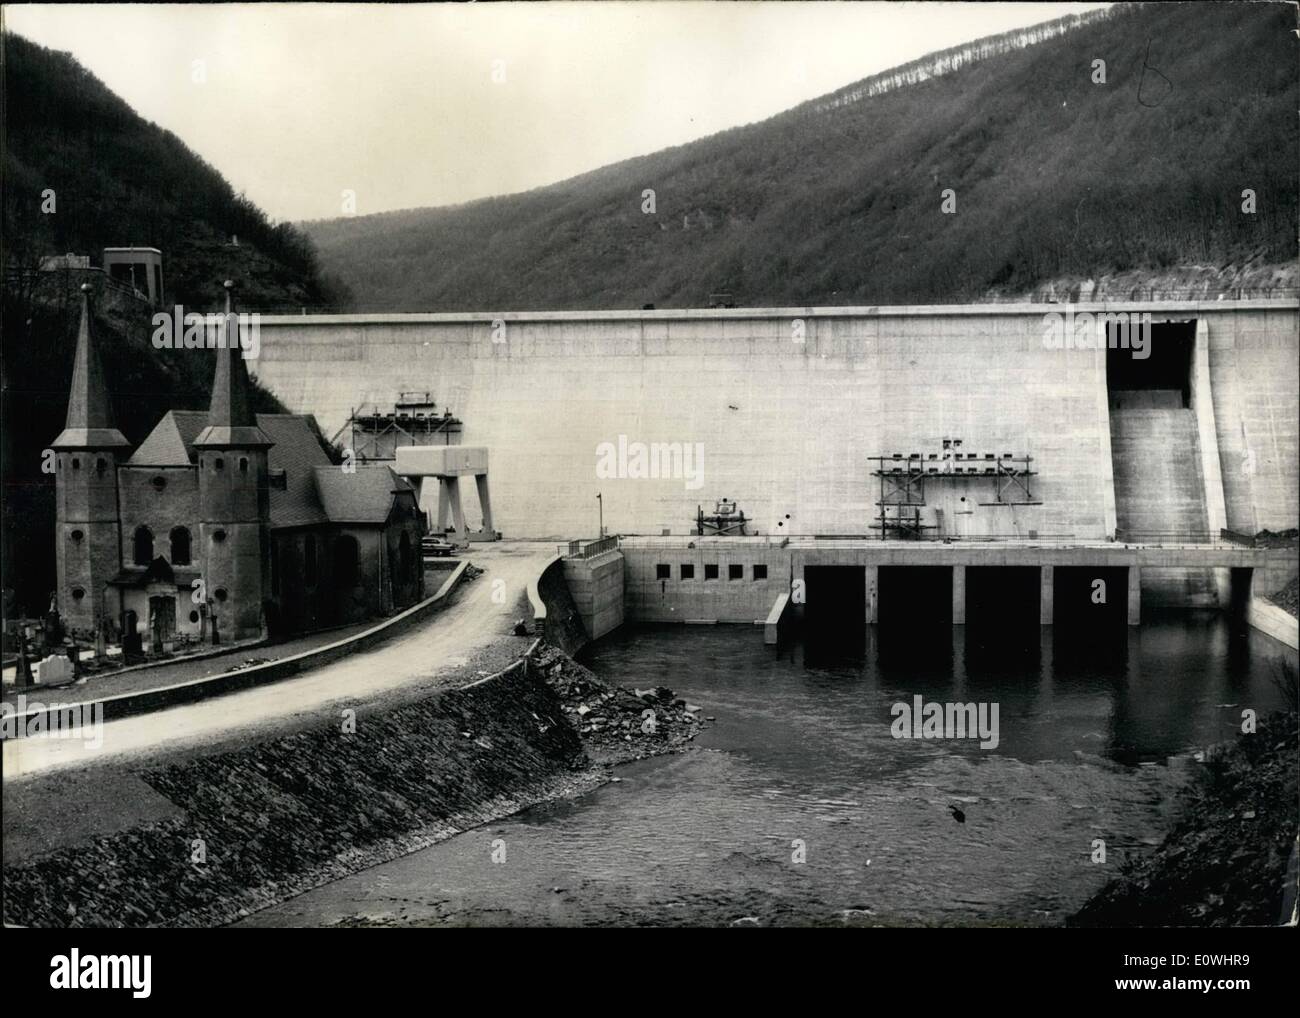 May 05, 1963 - Worlds biggest pumping elevator power plant is under construction at Vianden on the Our, a small river dividing Germany and Luxembourg. A giant dam holds the water in a big resevoir. At night it is pomped up 800 feet high to a great reservoir holding 7 million cubicmeters of water. The power plant, which will be completely ready in 1964, will produce 1,3 milliards of kilowatt-hours of electricity. In the first phase completed now, it produces 600 million kilowatthours. Photo shows the dam near Vianden, only a little smaller as the towers of the anciant church. Stock Photo